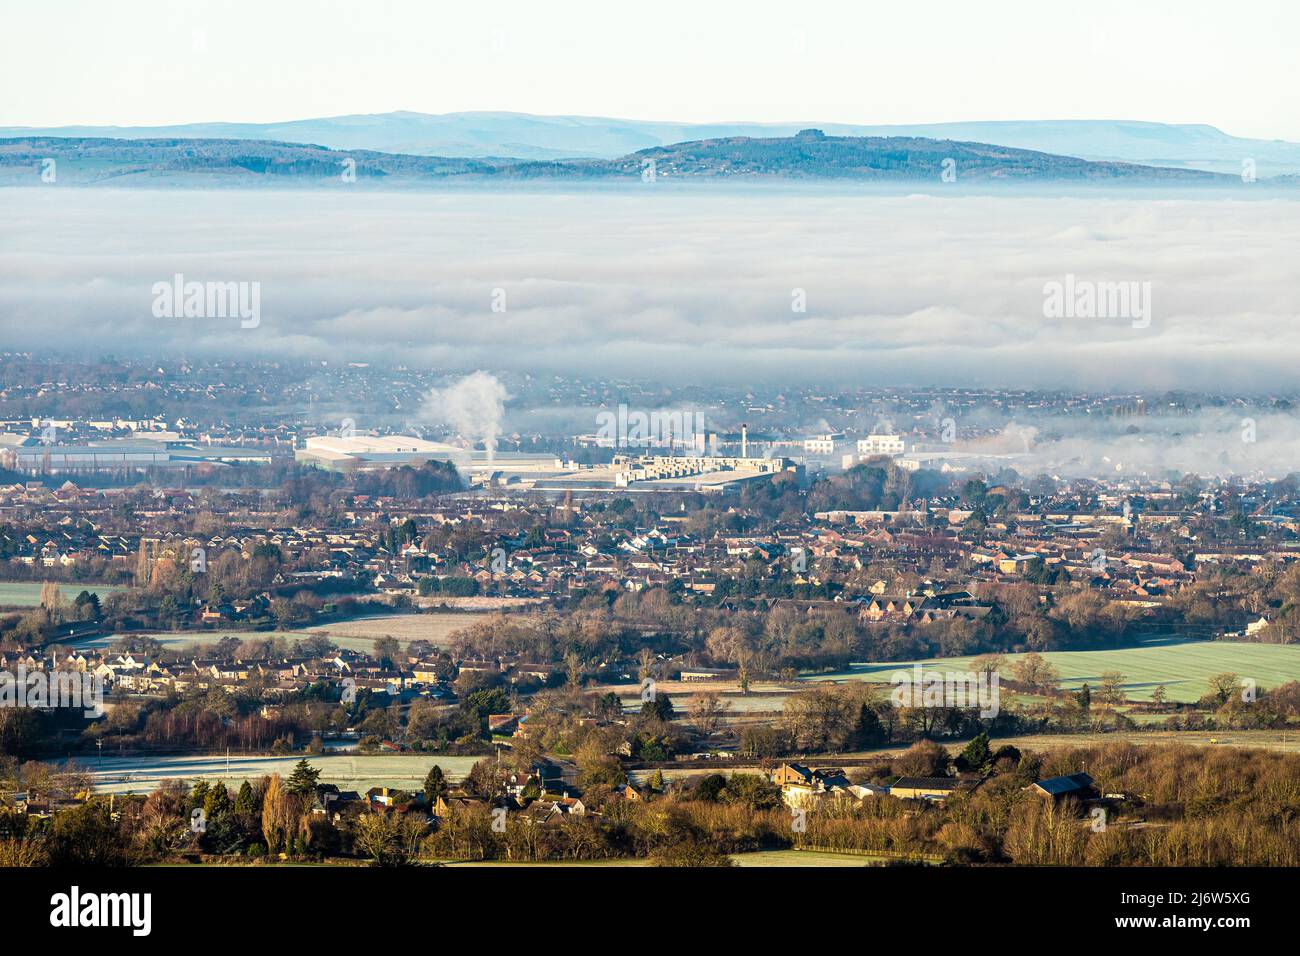 A temperature inversion causing fog to obscure the city of Gloucester, England UK. Brockworth is in the foreground and May Hill in the background. Stock Photo